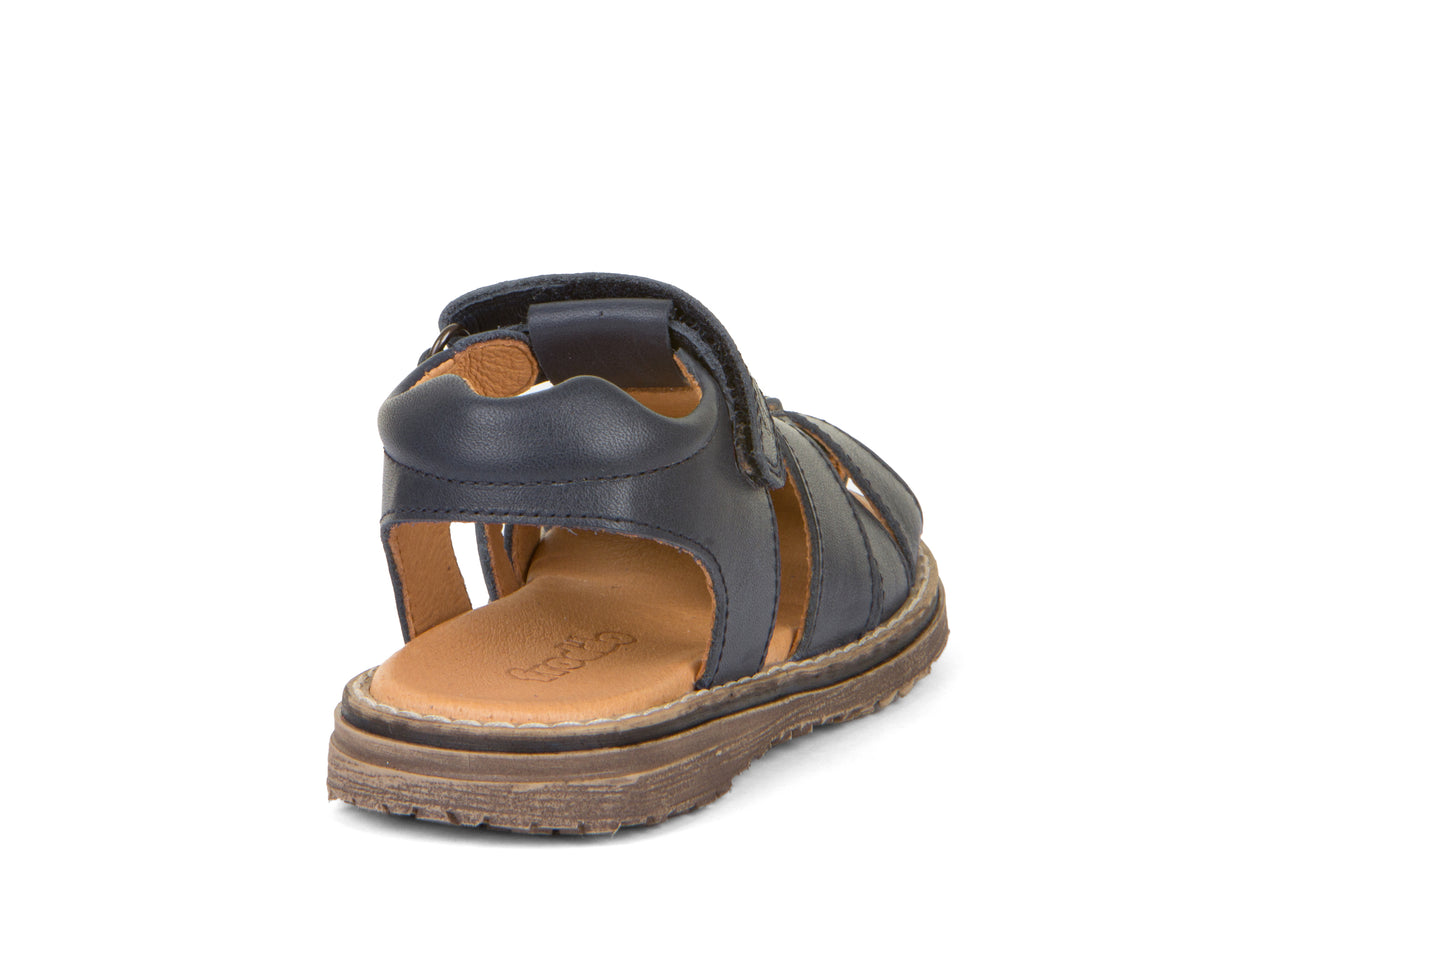 A boys sandal by Froddo, style G31500233 Daros in navy, velcro fastening. Back view.